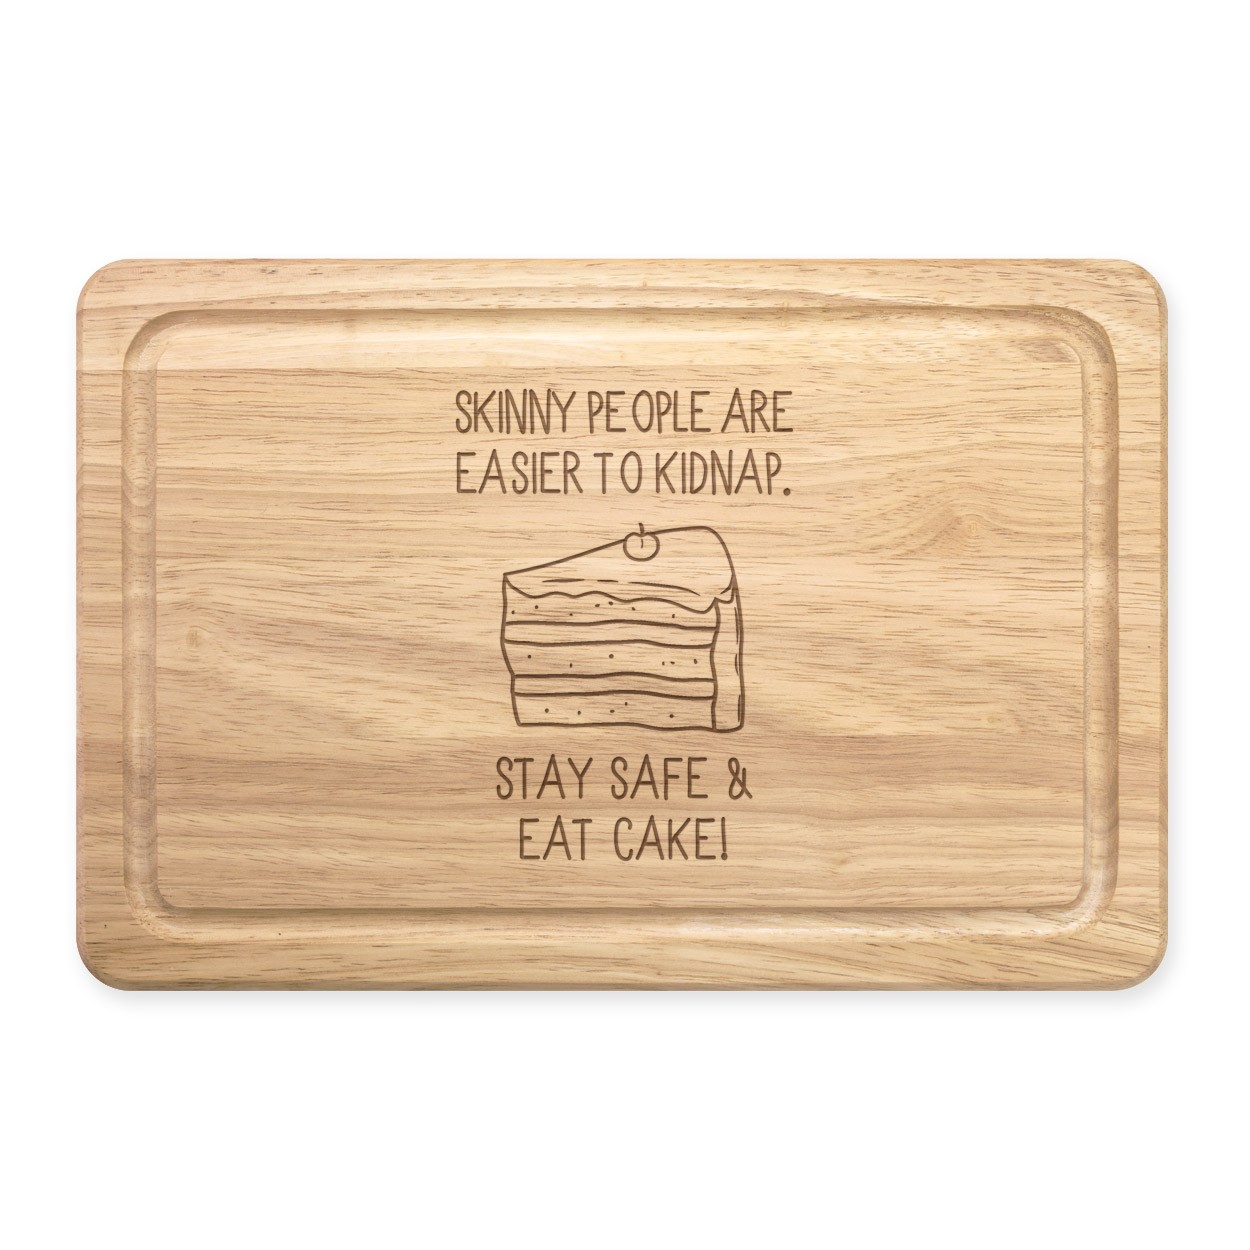 Skinny People Are Easier To Kidnap Stay Safe & Eat Cake Rectangular Wooden Chopping Board